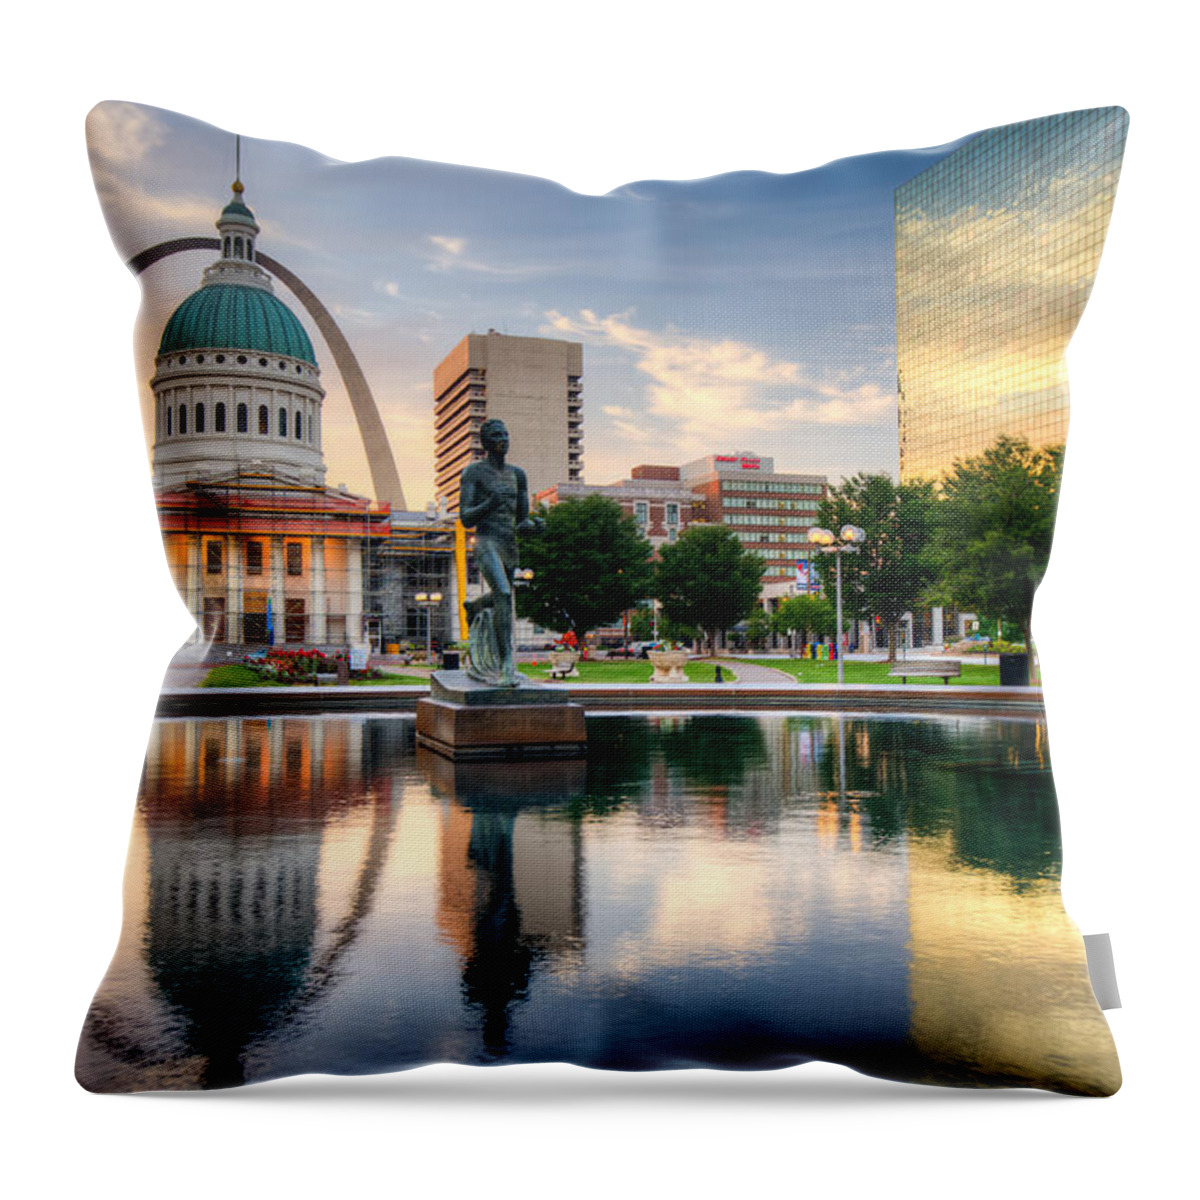 America Throw Pillow featuring the photograph Downtown St. Louis City Reflections by Gregory Ballos